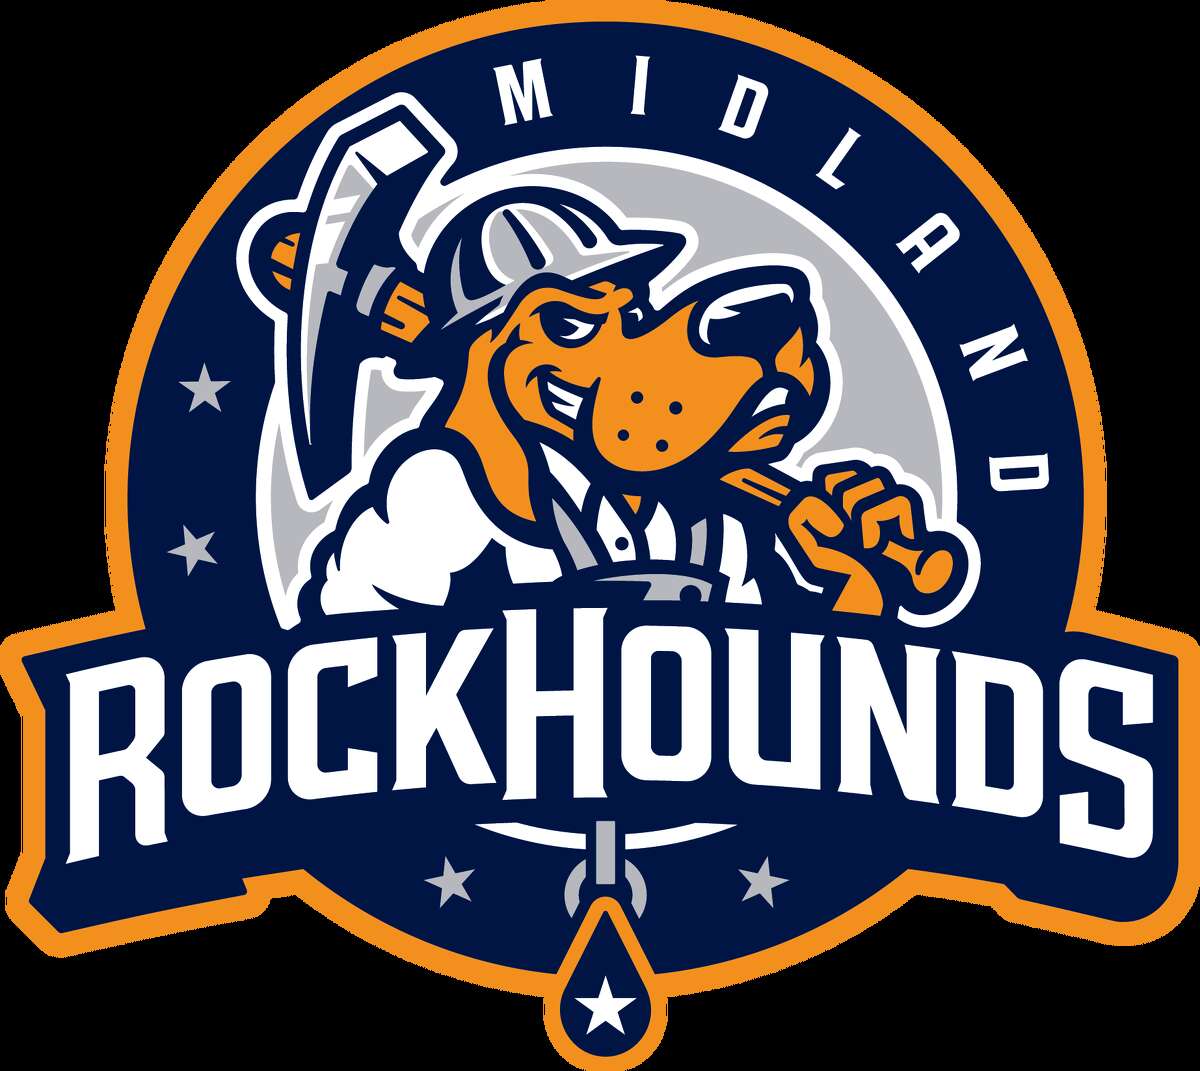 Midland Rockhounds 2022 Schedule Rockhounds' Upcoming Season Unaffected By Mlb's Lockout